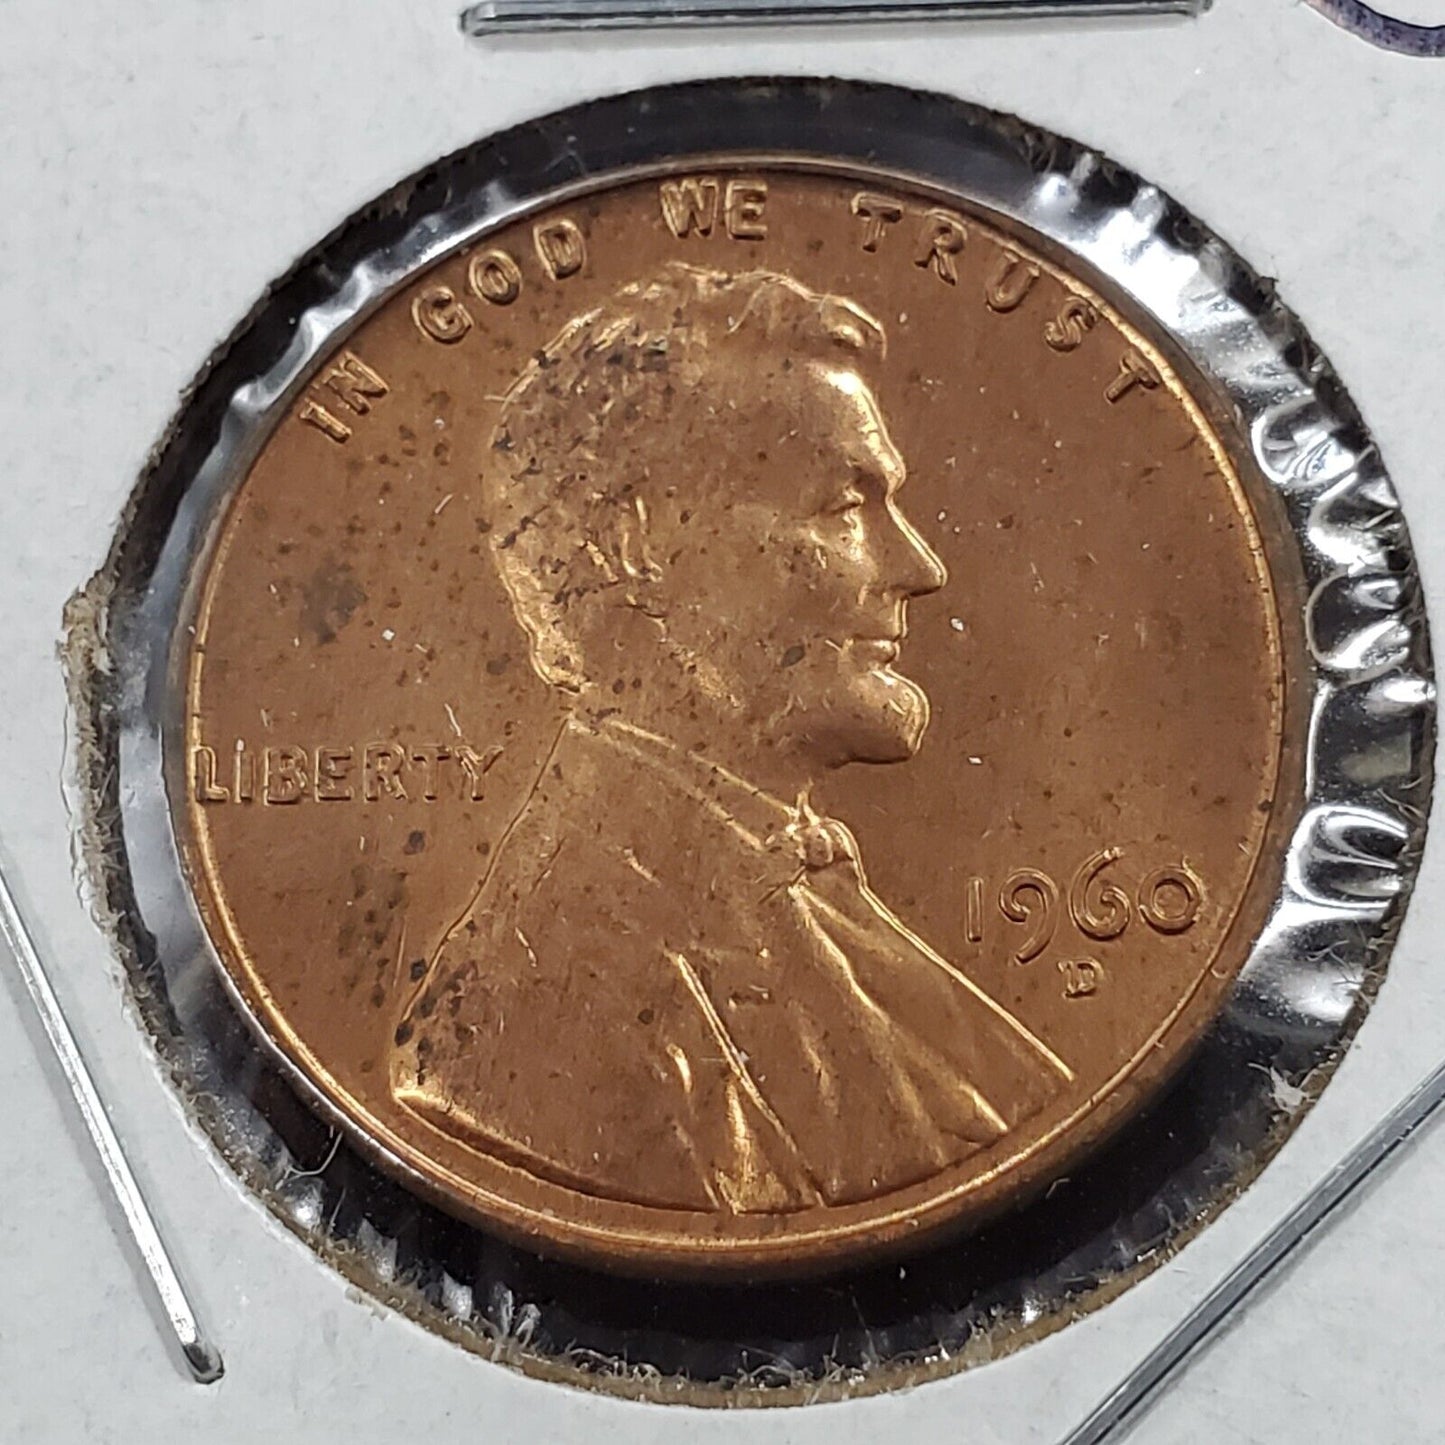 1960 D/D Lincoln Memorial Cent Penny Coin FS-502 RPM BU UNC RB Variety